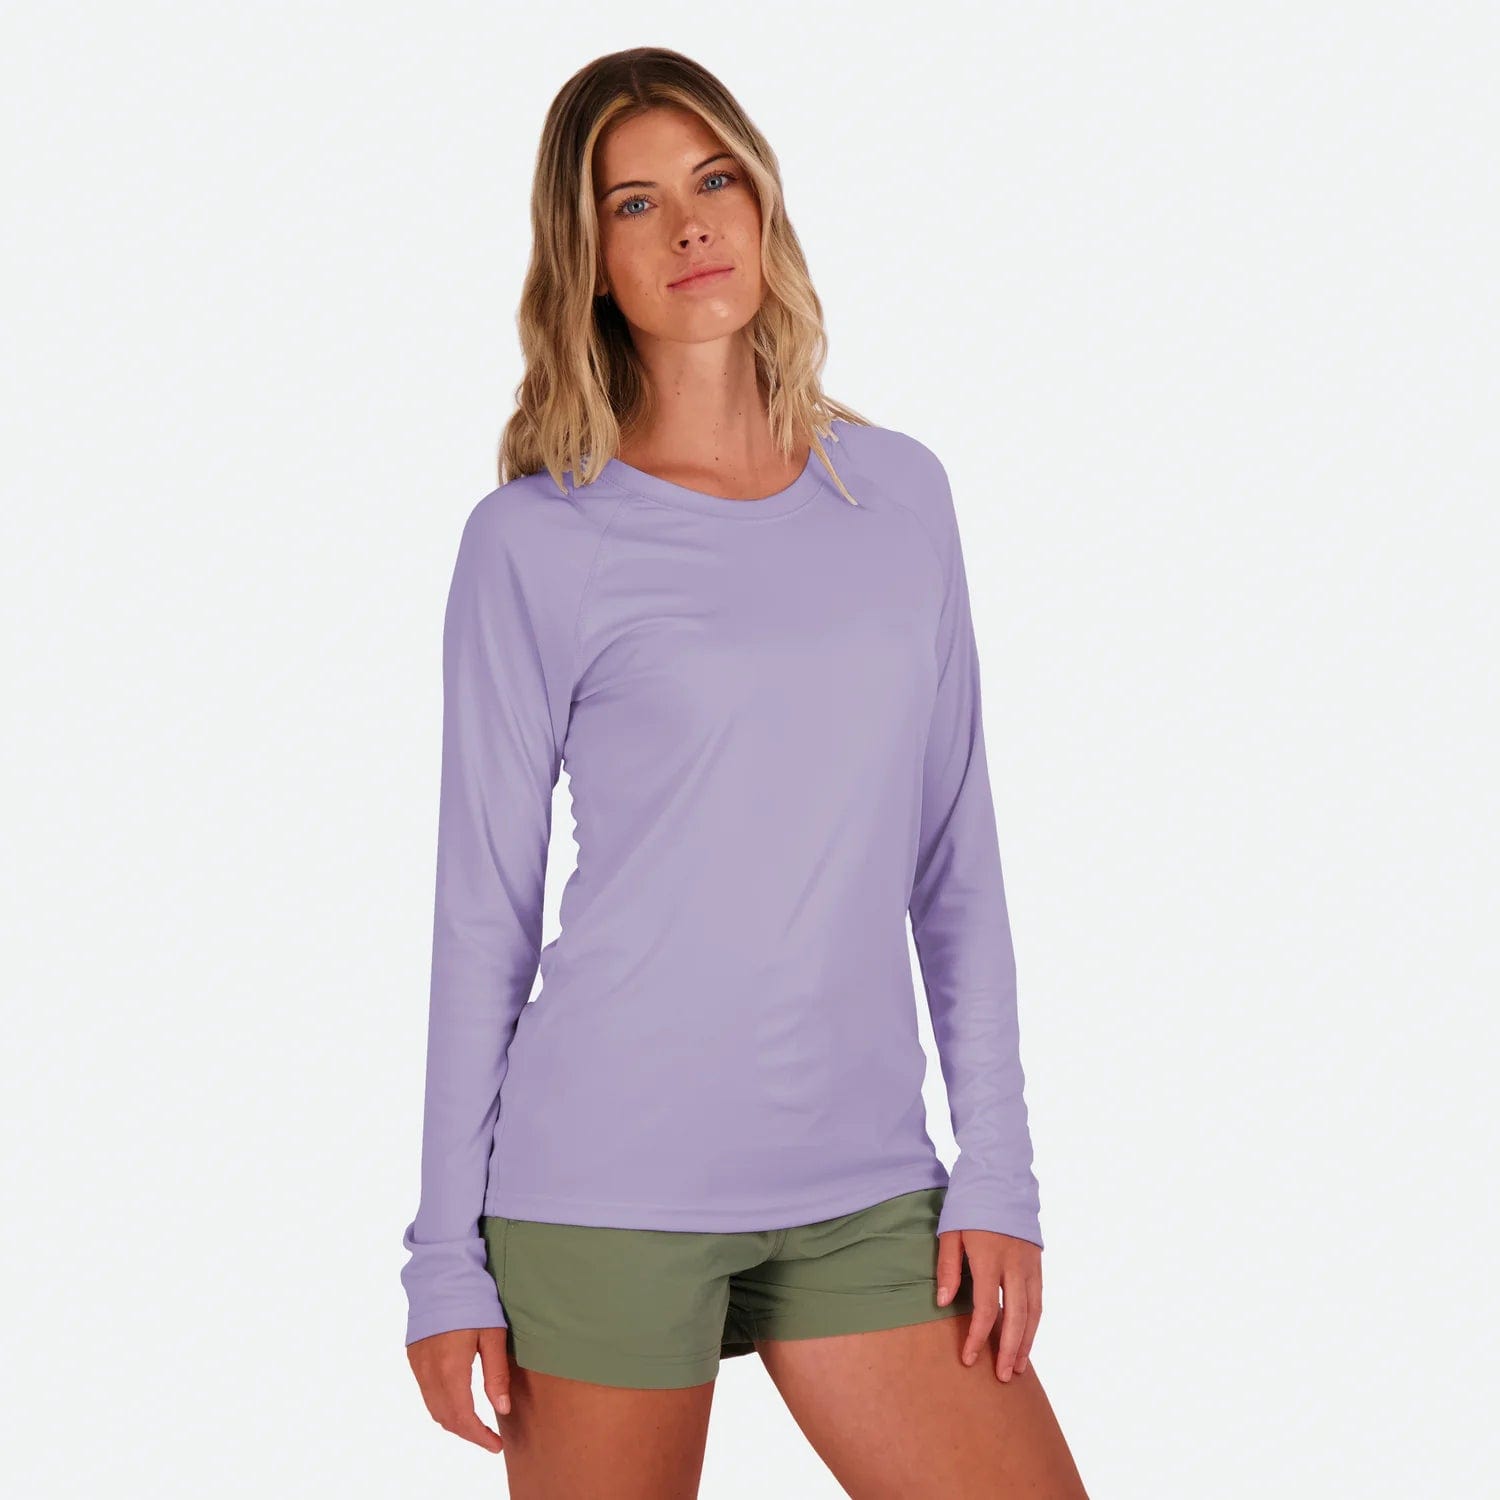 Lululemon shoppers love this $54 long sleeve top